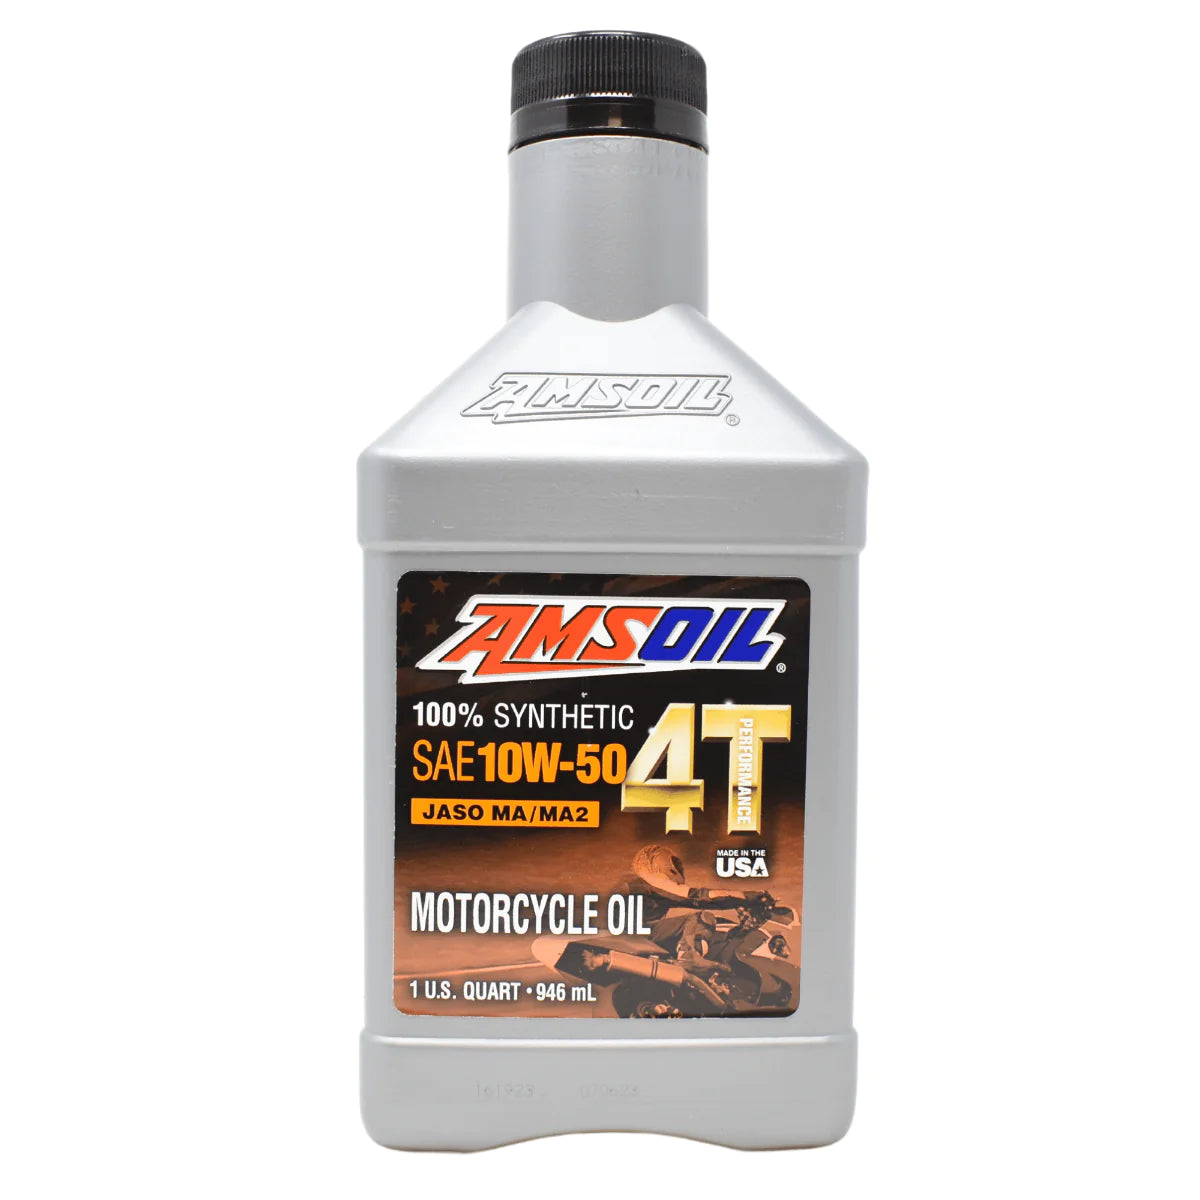 AMSOIL SYNTHETIC 10W50 MOTORCYCLE OIL AMS OIL